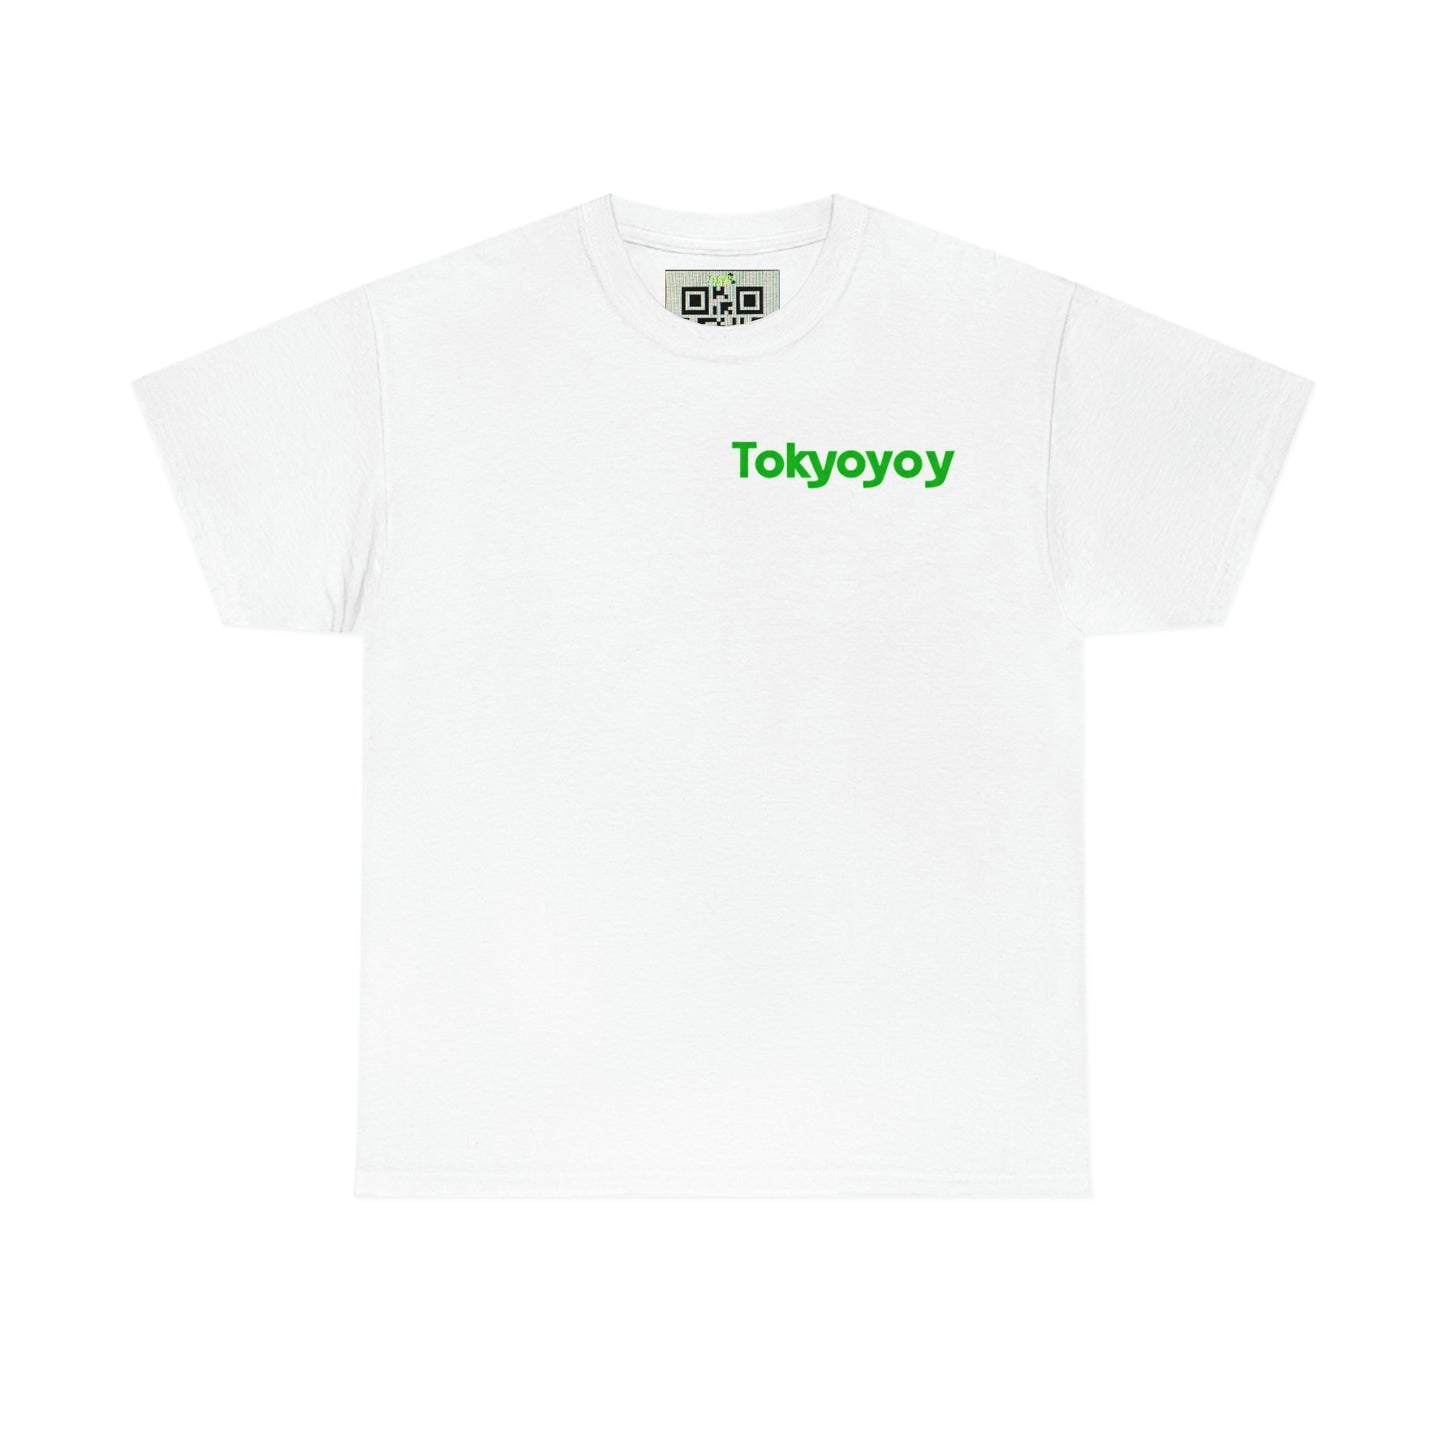 Copy of Copy of Tolerate - Indigenous Dystopian Warrior  T-Shirt Collection